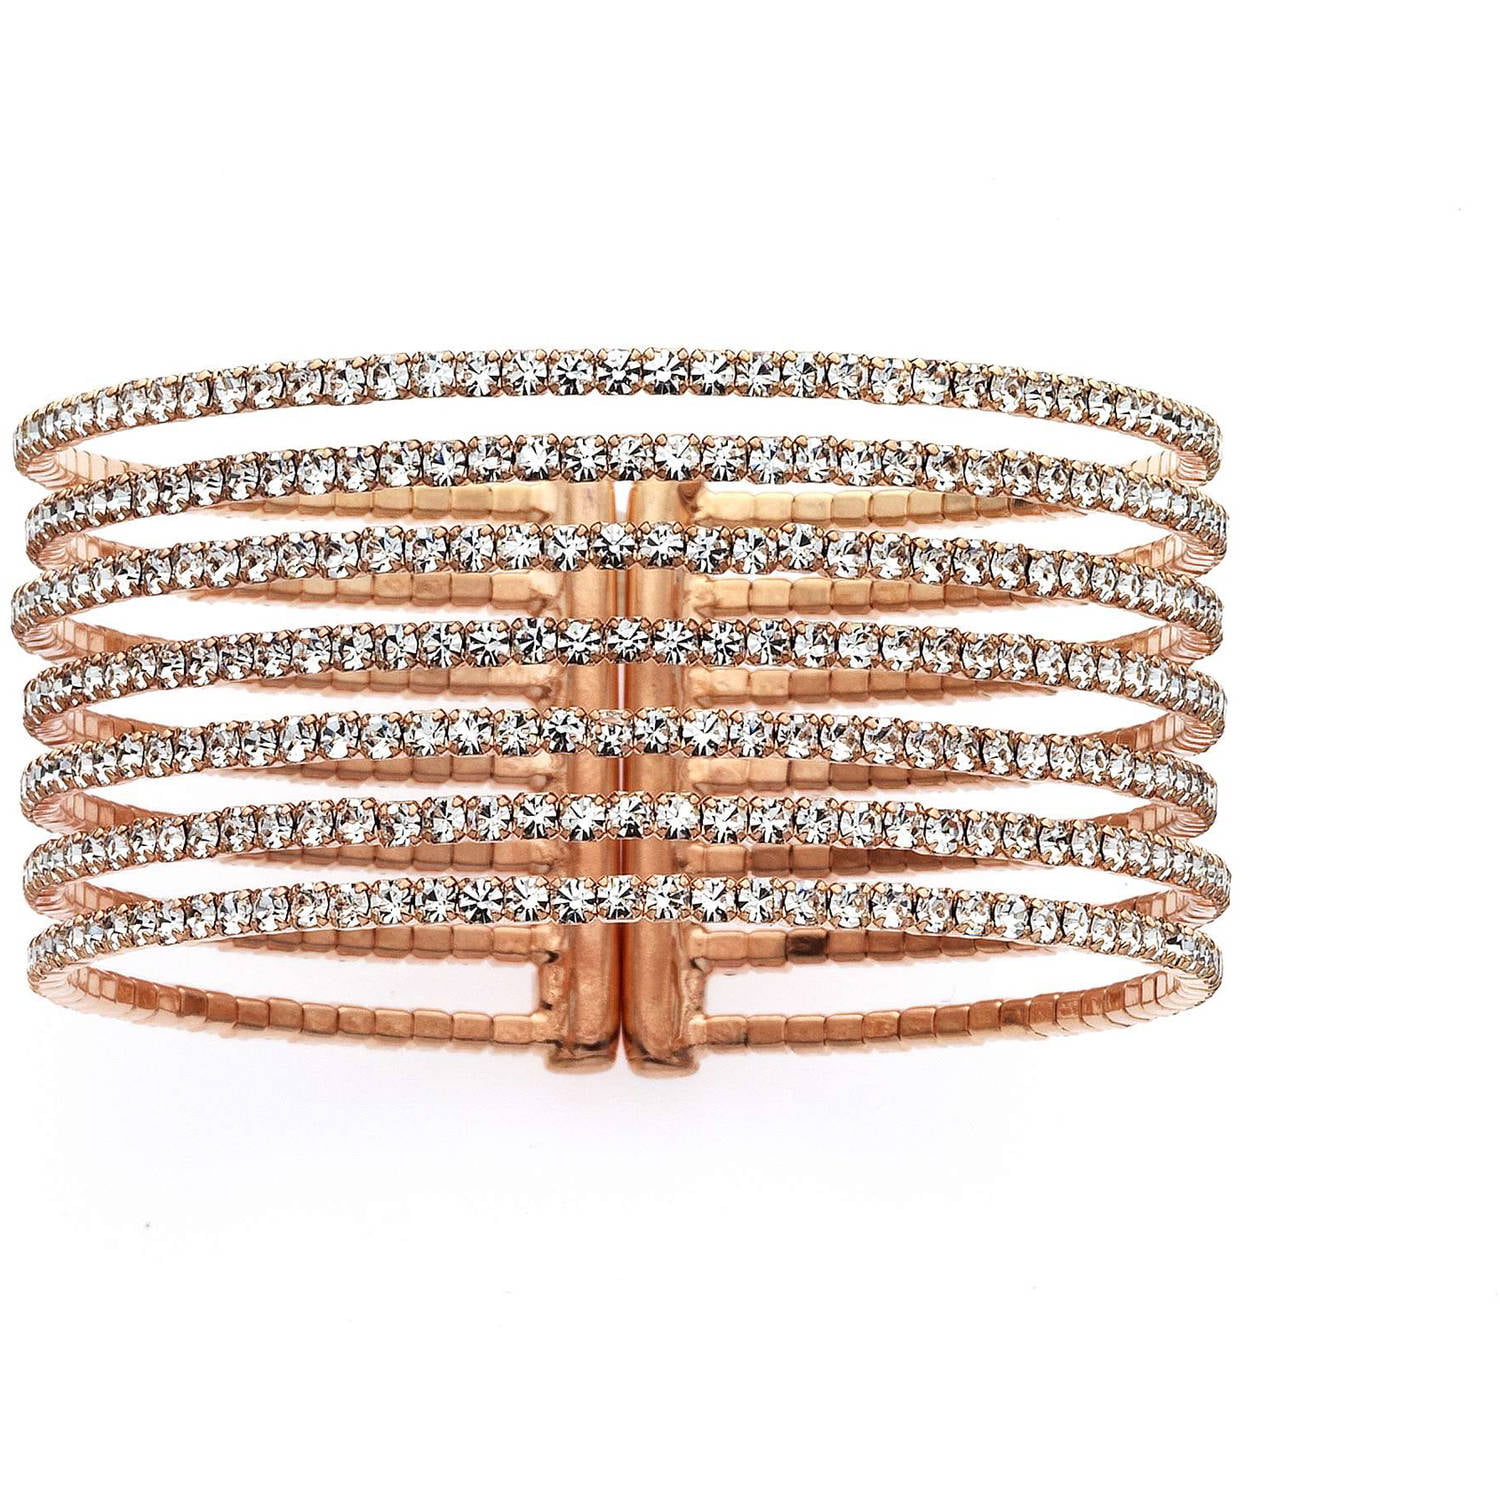 Handset Austrian Crystal Rose Gold-Plated 7-Row Gap Bangle, One Size ...